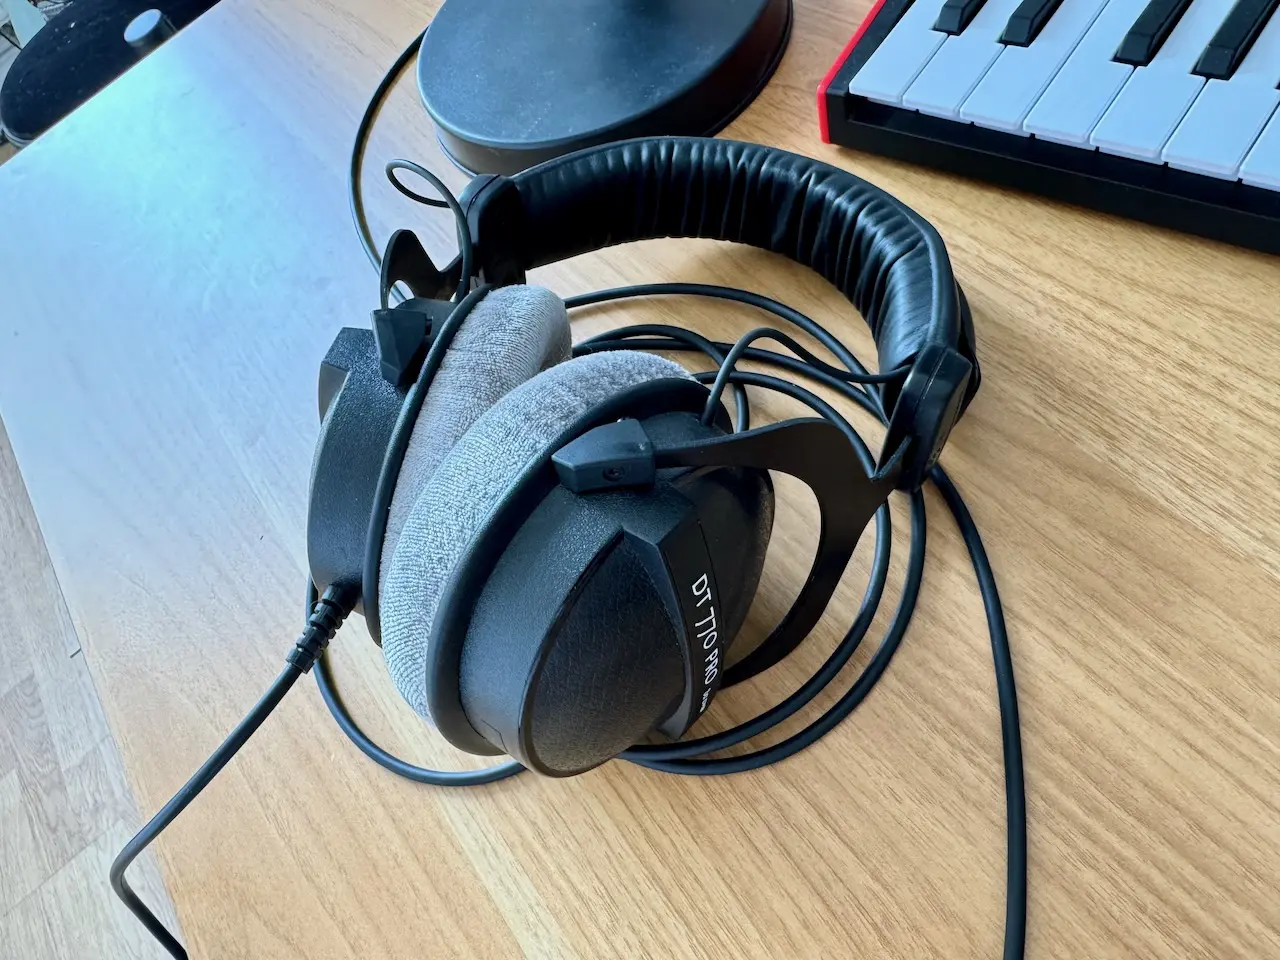 An image of DT 770 Pros